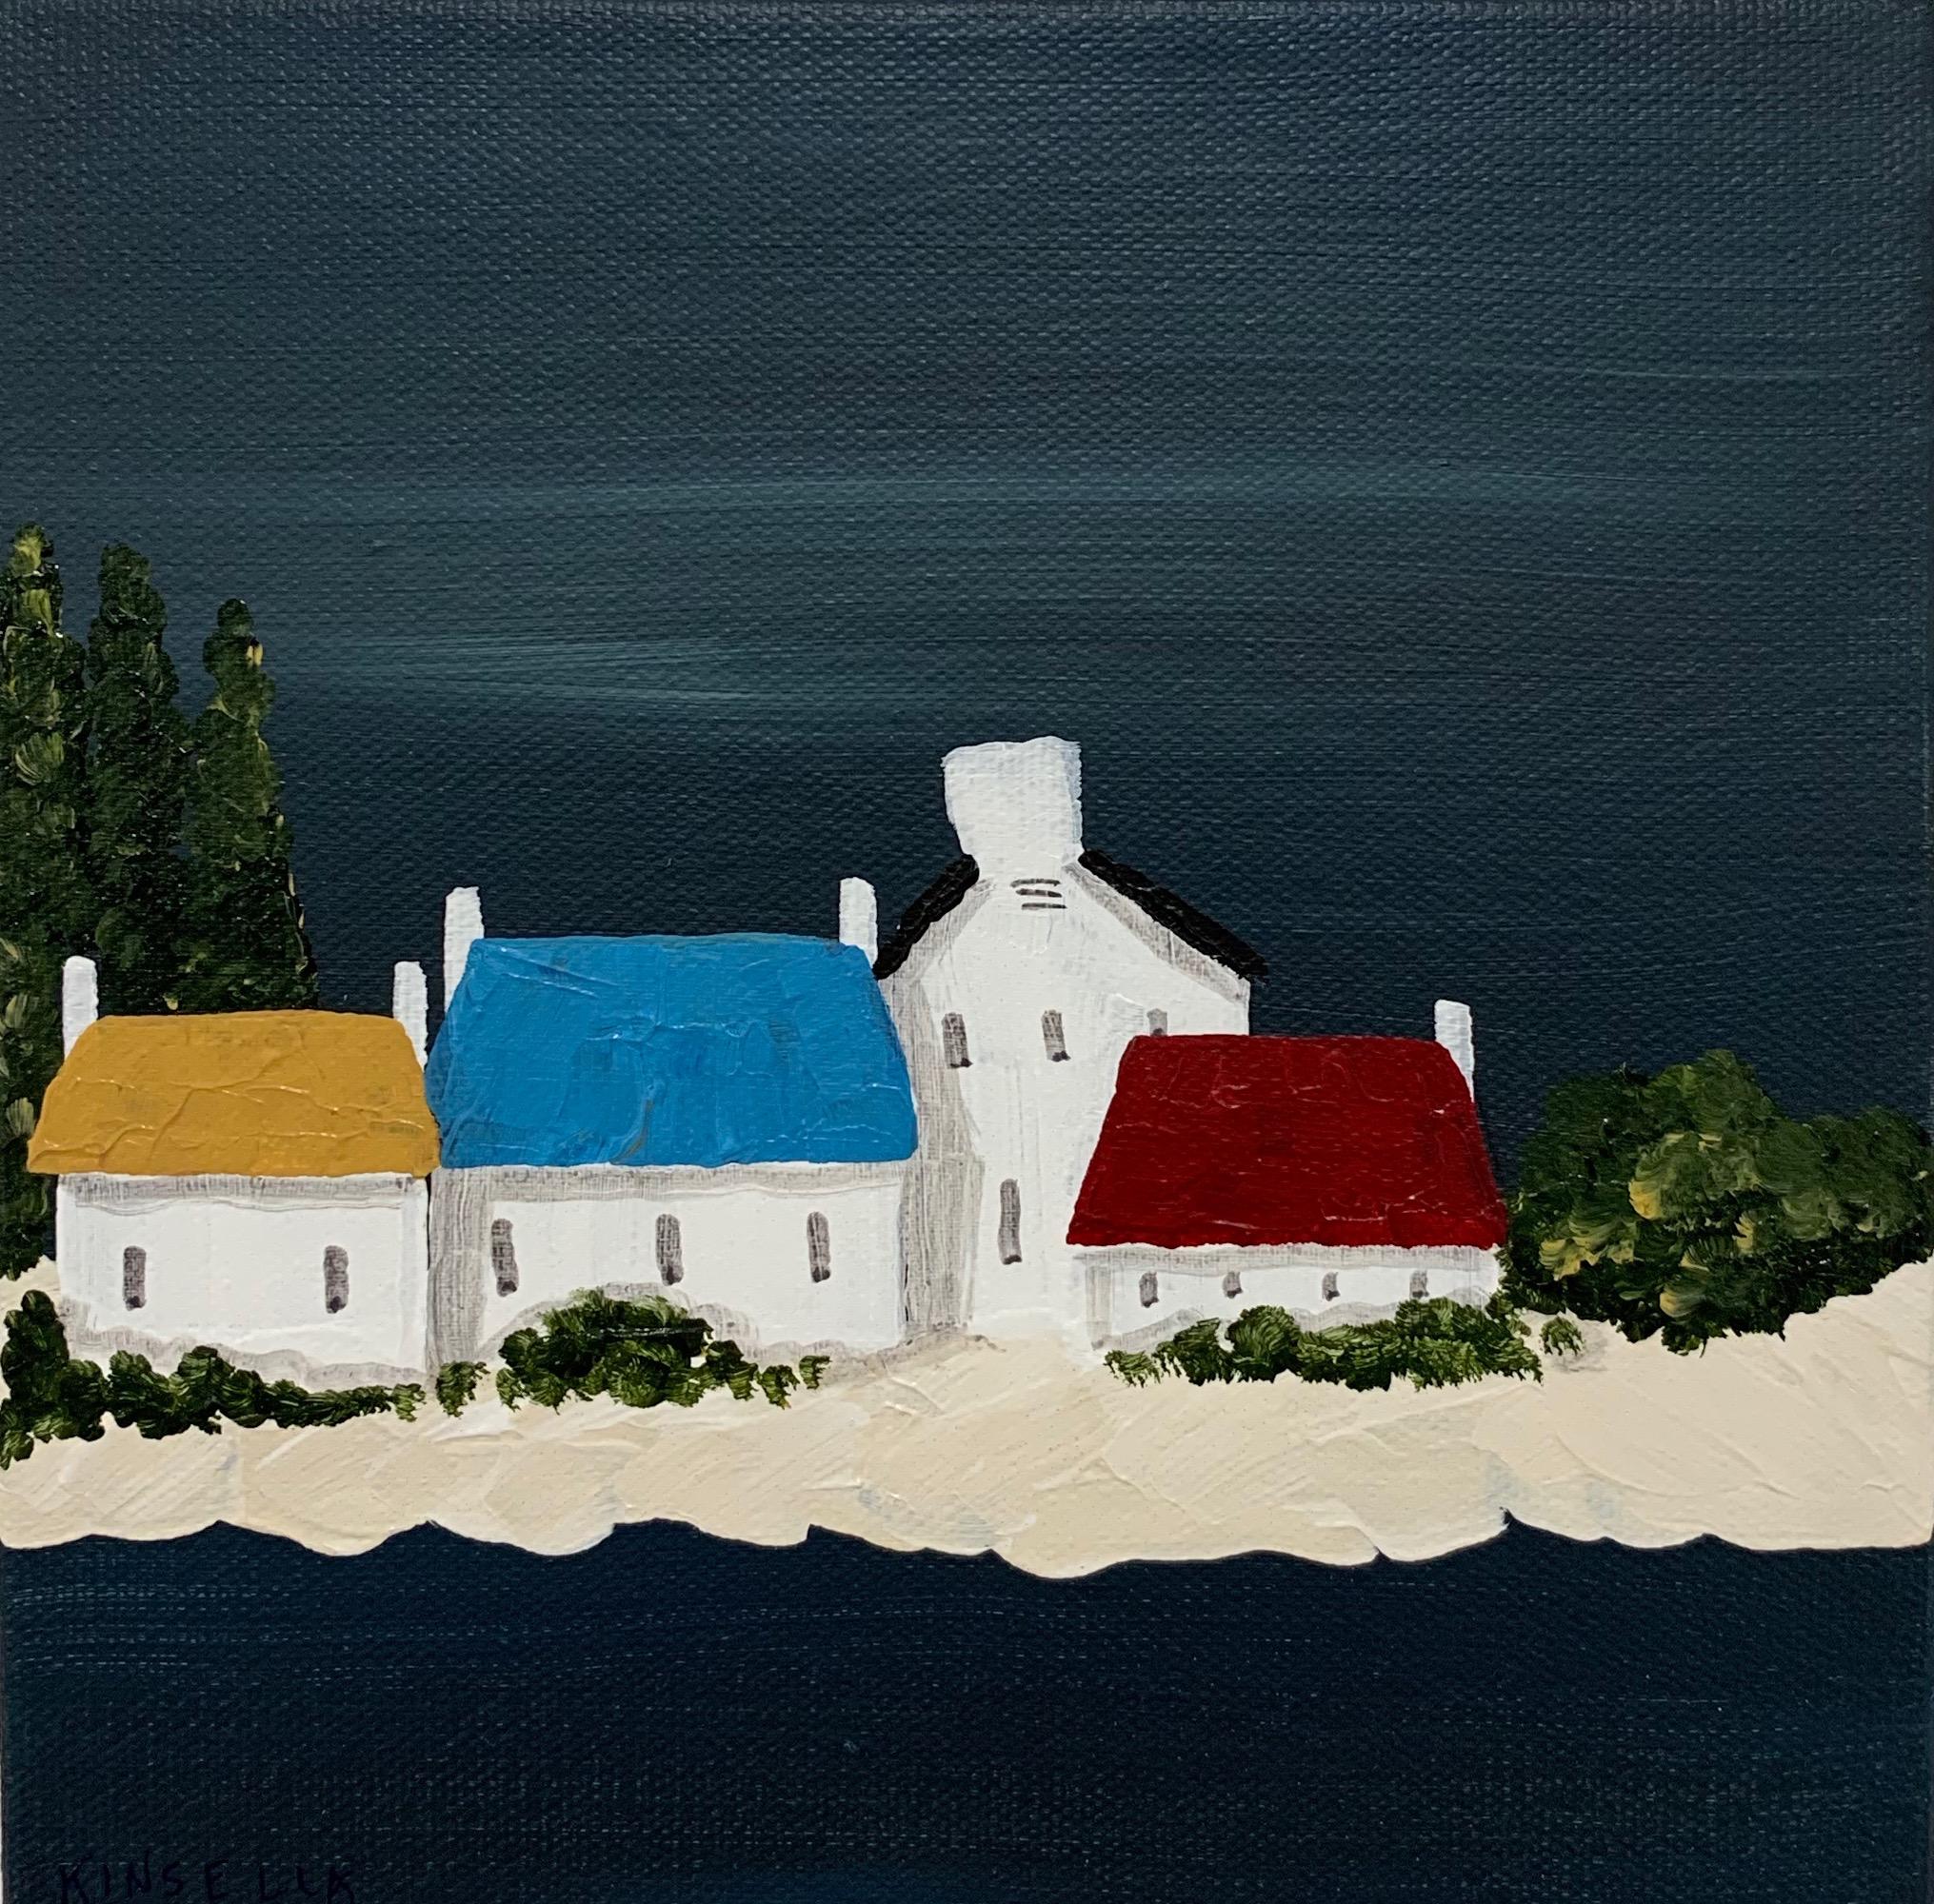 'Village IV' is a petite contemporary acrylic on canvas coastal painting of square format, created by American artist Susan Kinsella in 2019. Featuring a strong palette made of dark blue grey, black, white and beige colors accented with touches of